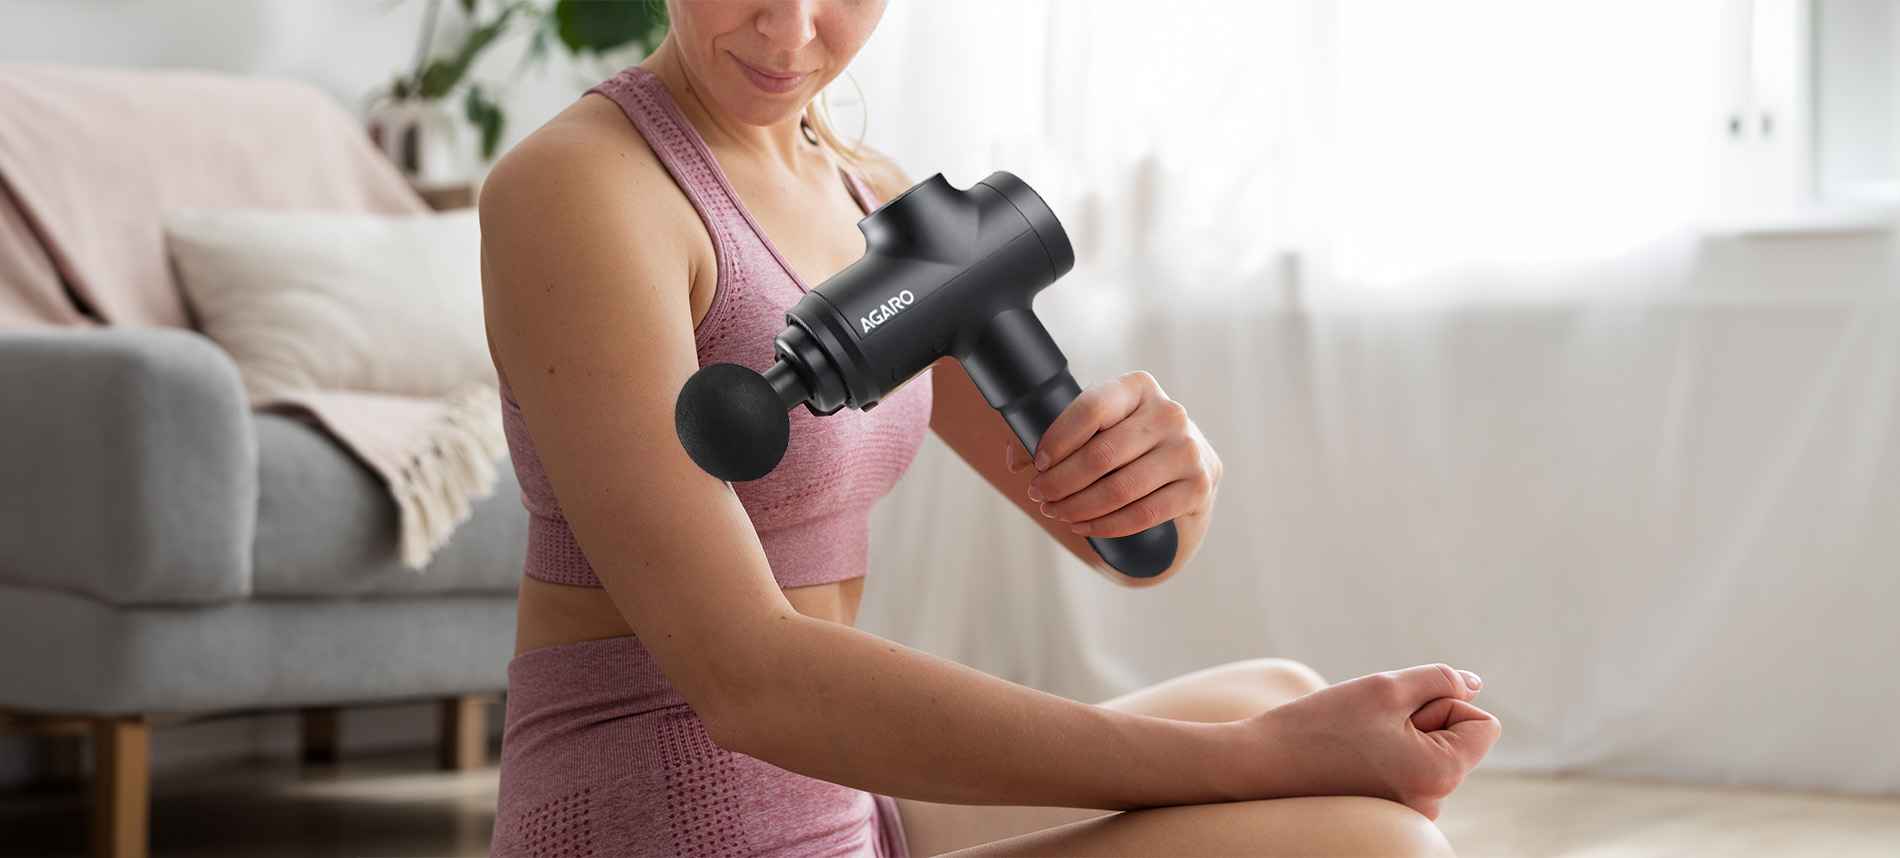 Full Body Massaging Machine Price List For Ultimate Relaxation